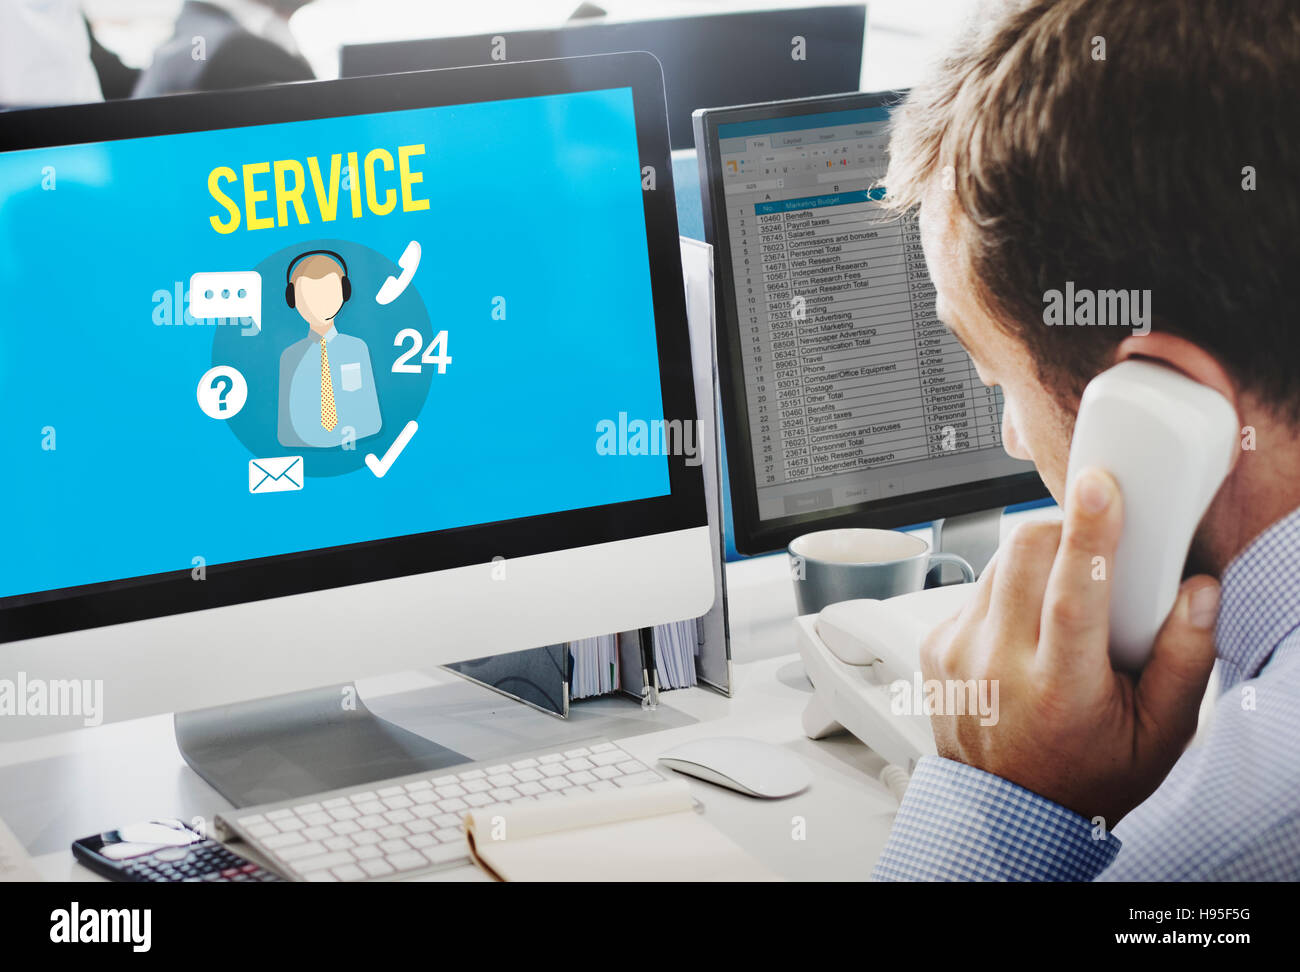 Service Support Helping Hands Service Industry Concept Stock Photo